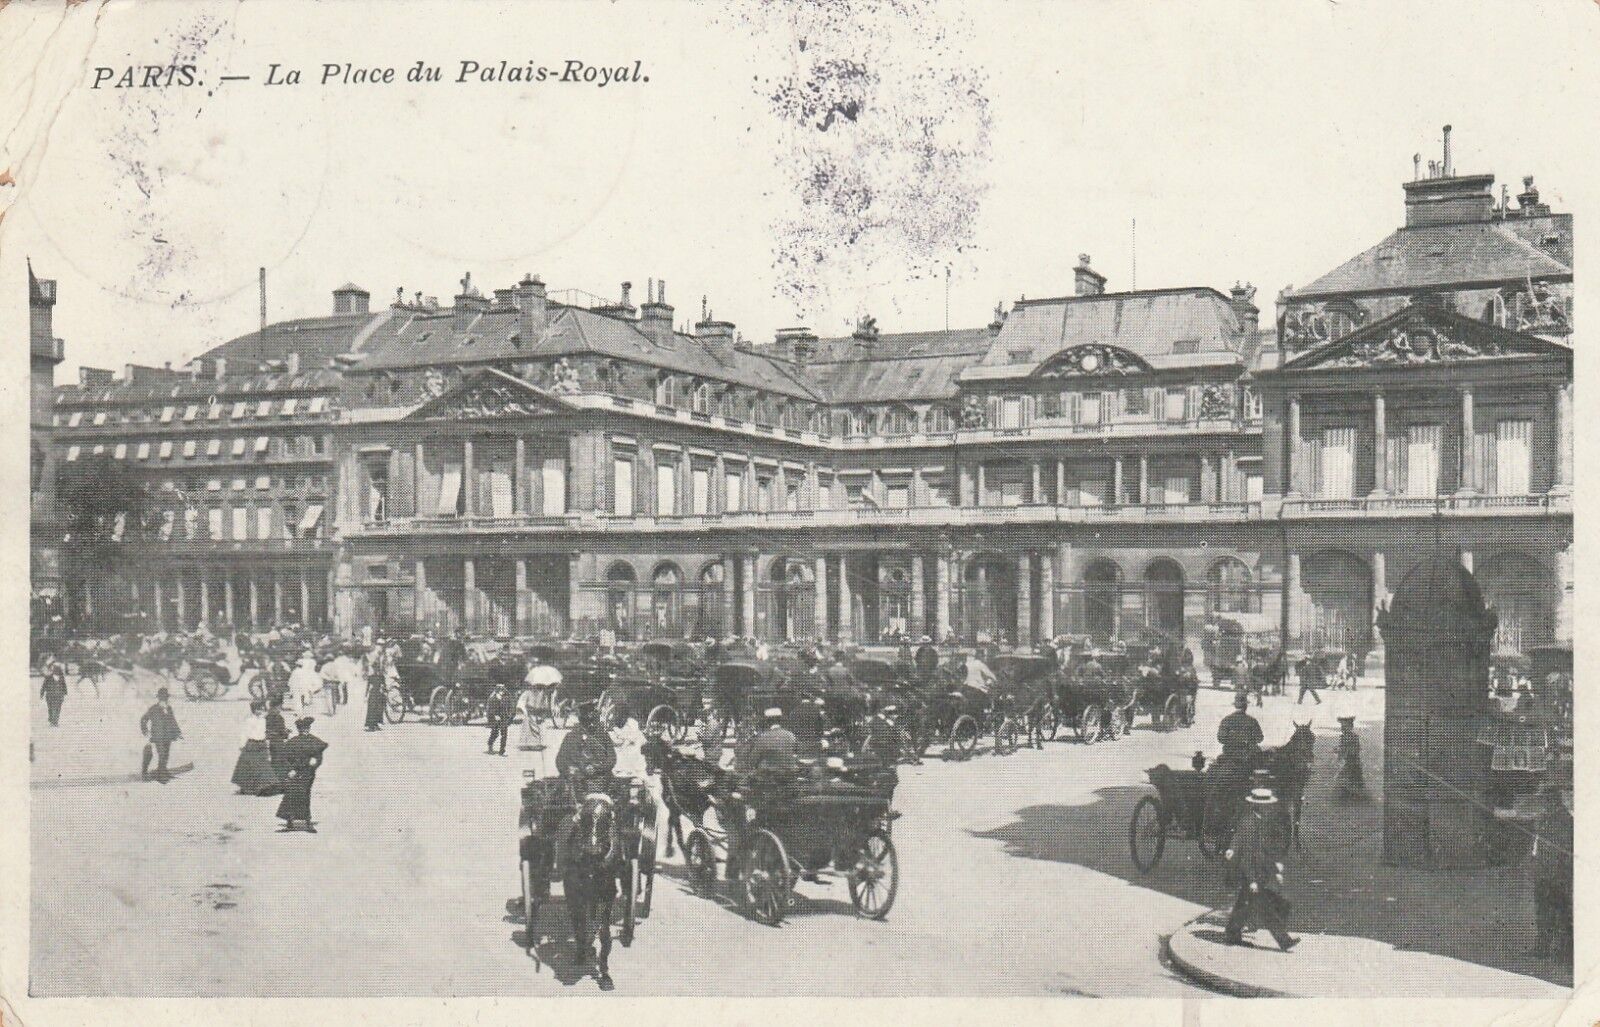 KAPPYS 22418-10 FRENCH POSTCARD POST 1907 PARIS ROYAL PALACE CARRIAGES HORSES